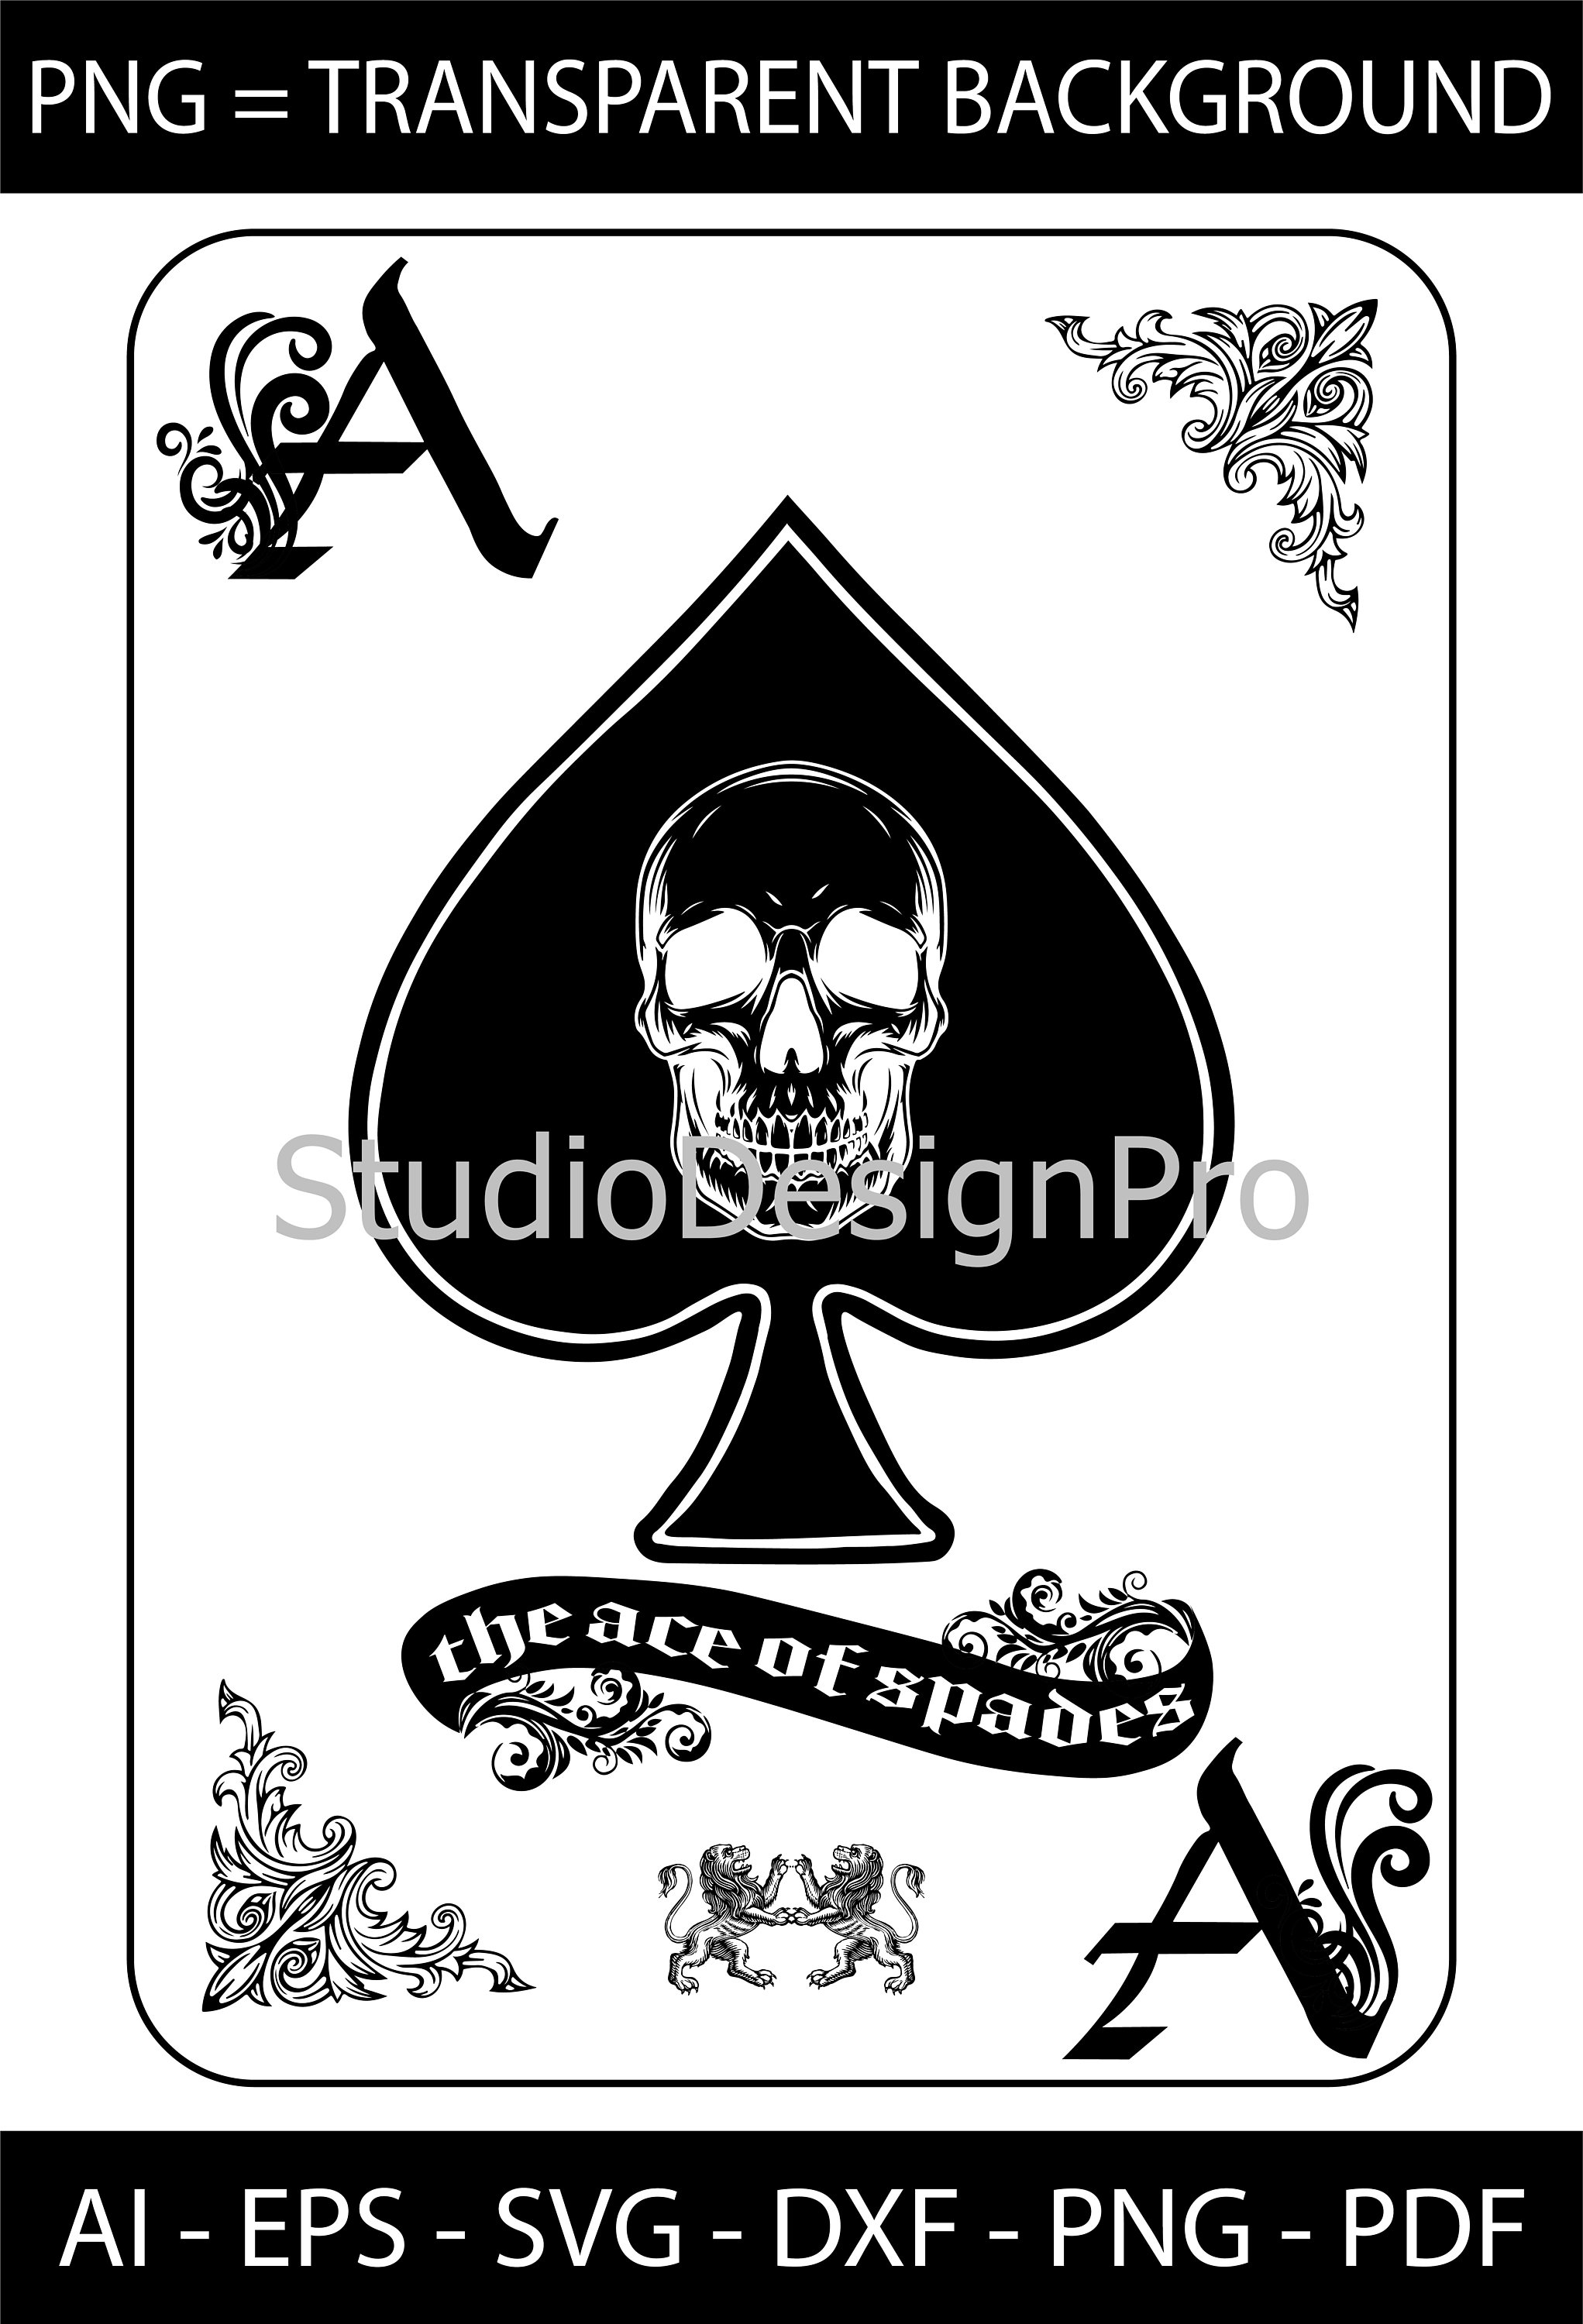 Luxocase A Card Ace of Spades Logo Art Back Case Cover Stylish